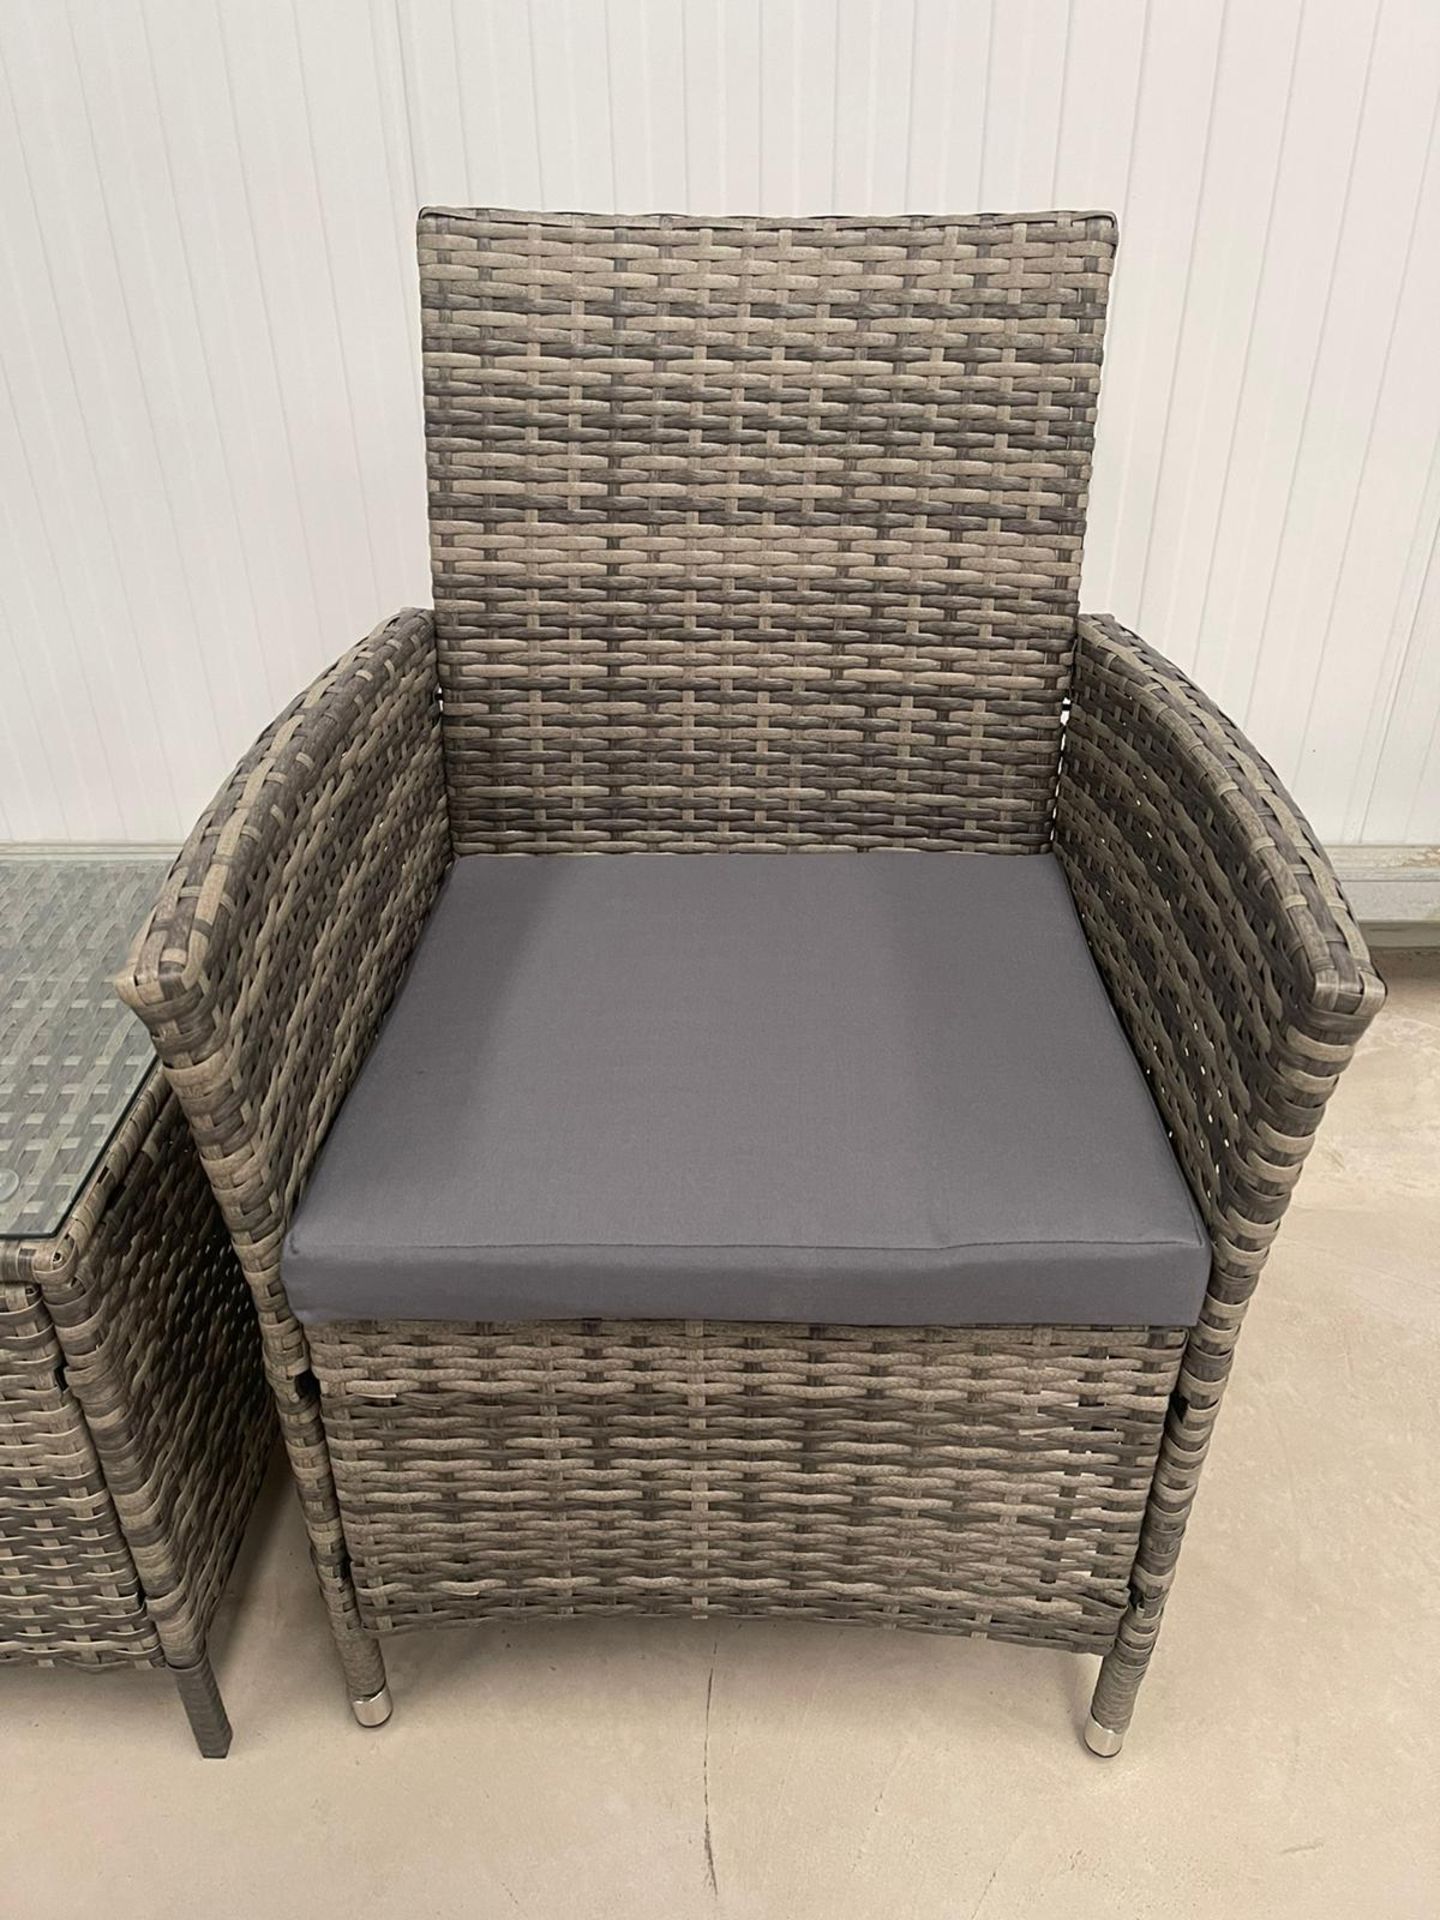 RRP £199 - NEW GREY BISTRO SET. TABLE 40 X 40 X 45CM, CHAIR 52 X 56 X 83CM - Image 3 of 4